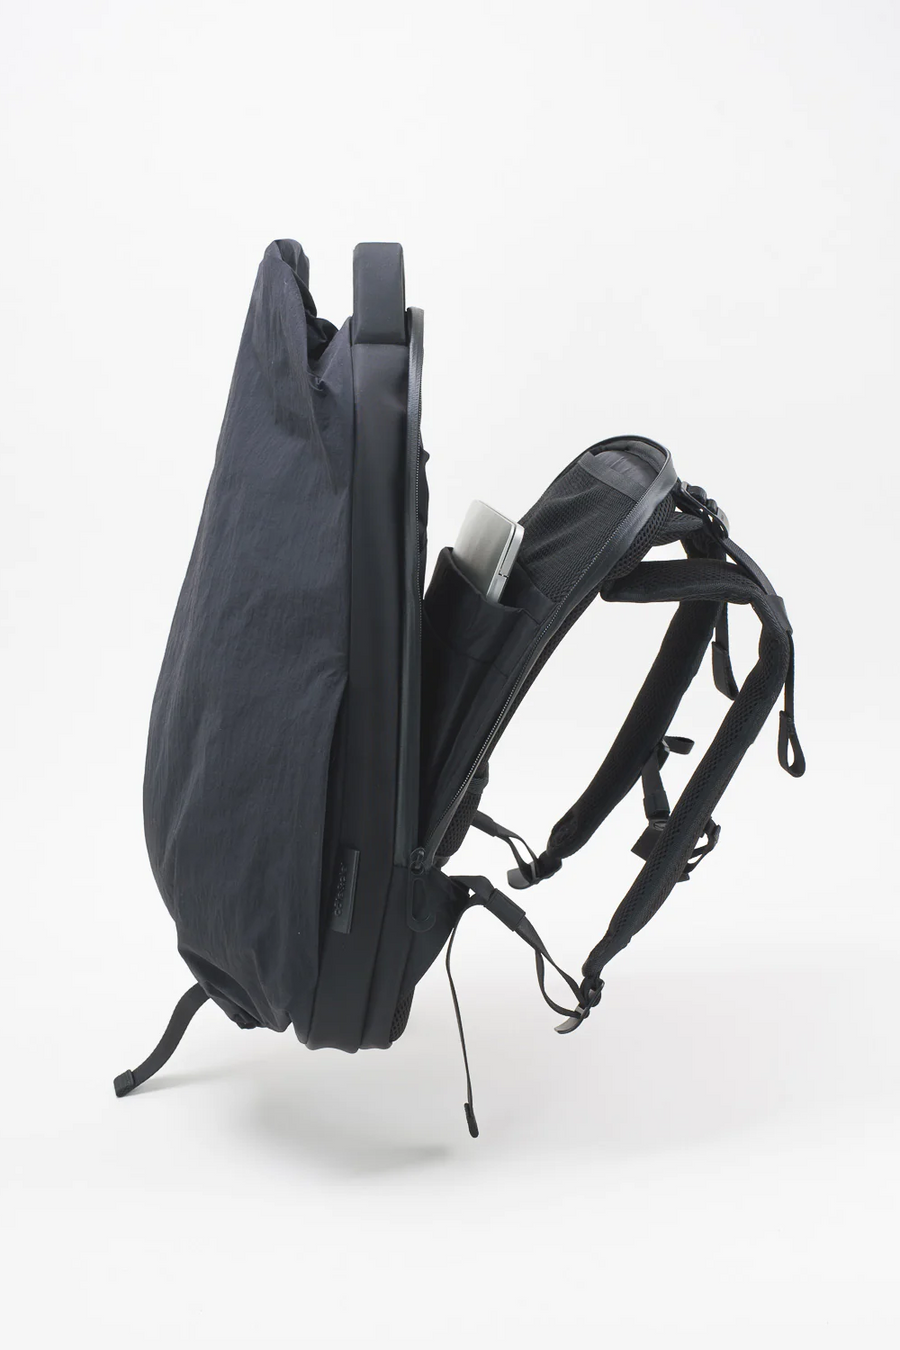 Buy the Cote & Ciel | Isar M Komatsu Onibegie Nylon Backpack in Black at Intro. Spend £50 for free UK delivery. Official stockists. We ship worldwide.